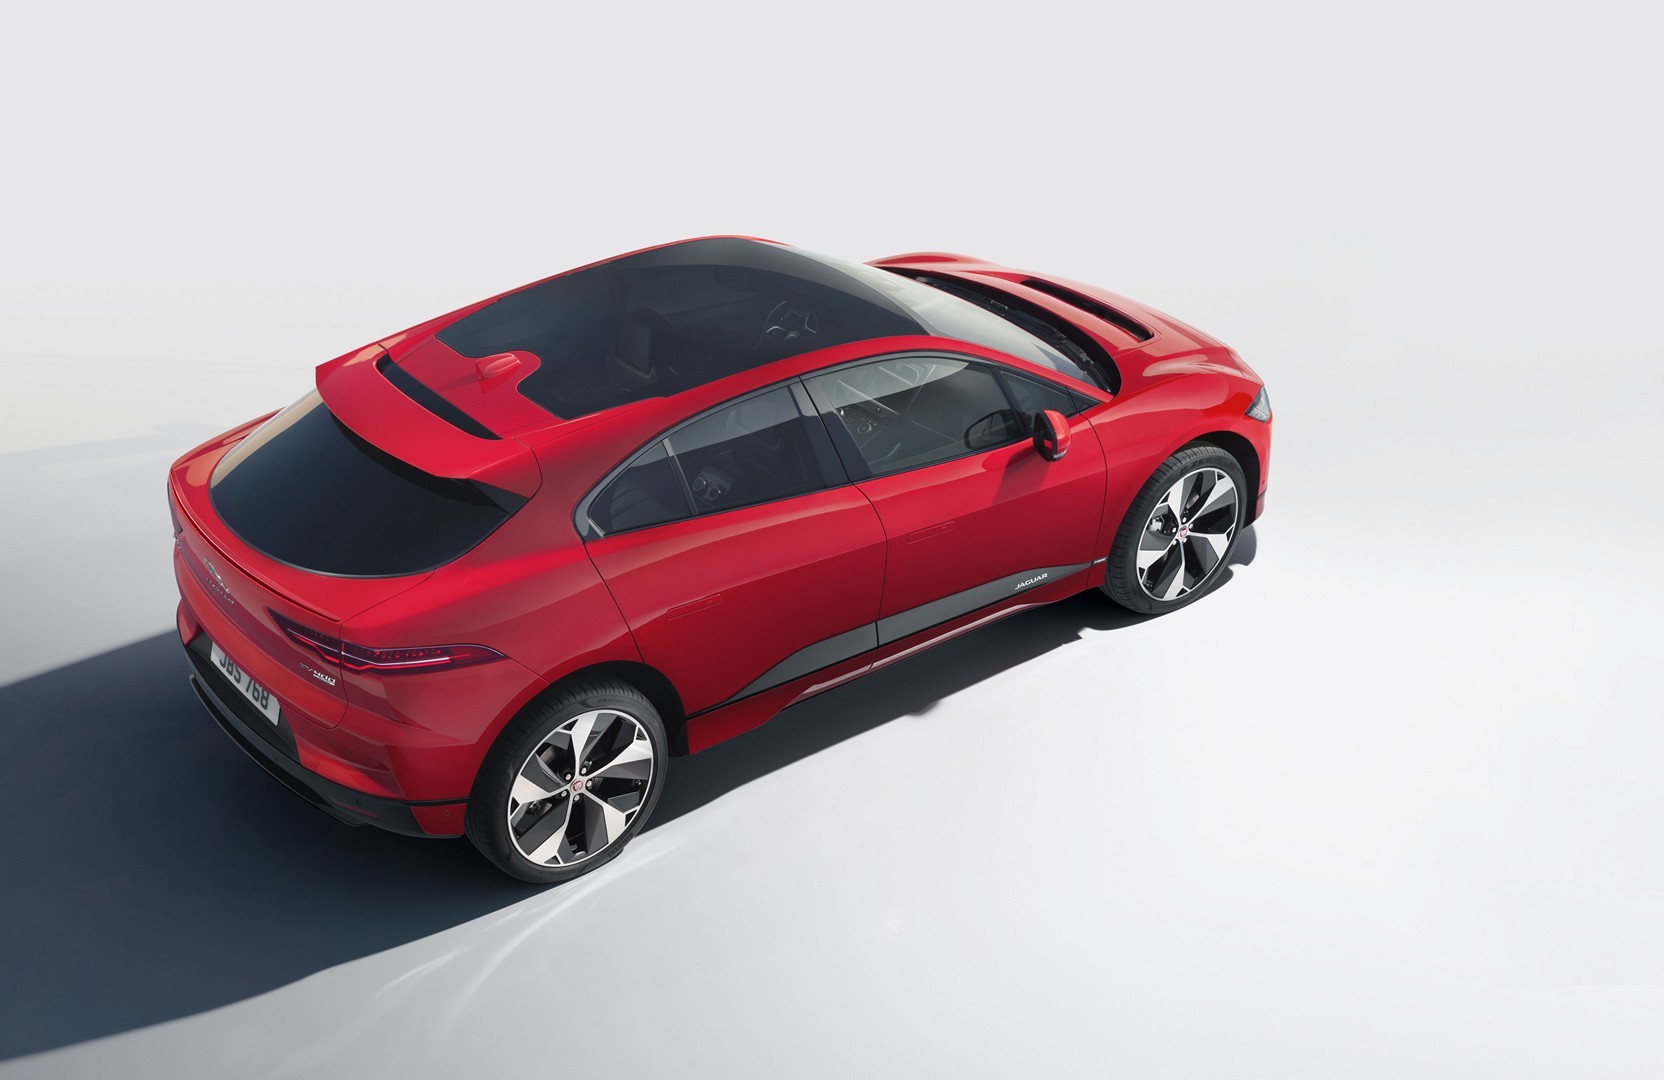 https://s1.cdn.autoevolution.com/images/news/gallery/2020-jaguar-i-pace-update-offers-234-miles-of-range-thanks-to-etrophy-know-how_6.jpg